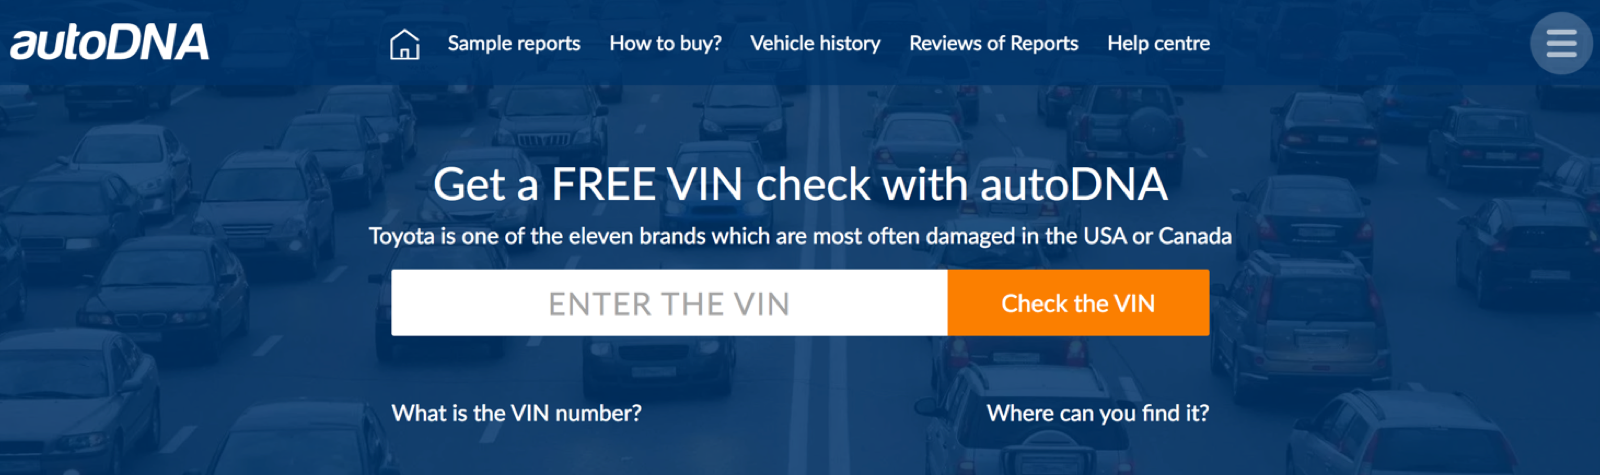 10 of the best Vin decoders to lookup VIN numbers for free photo 13